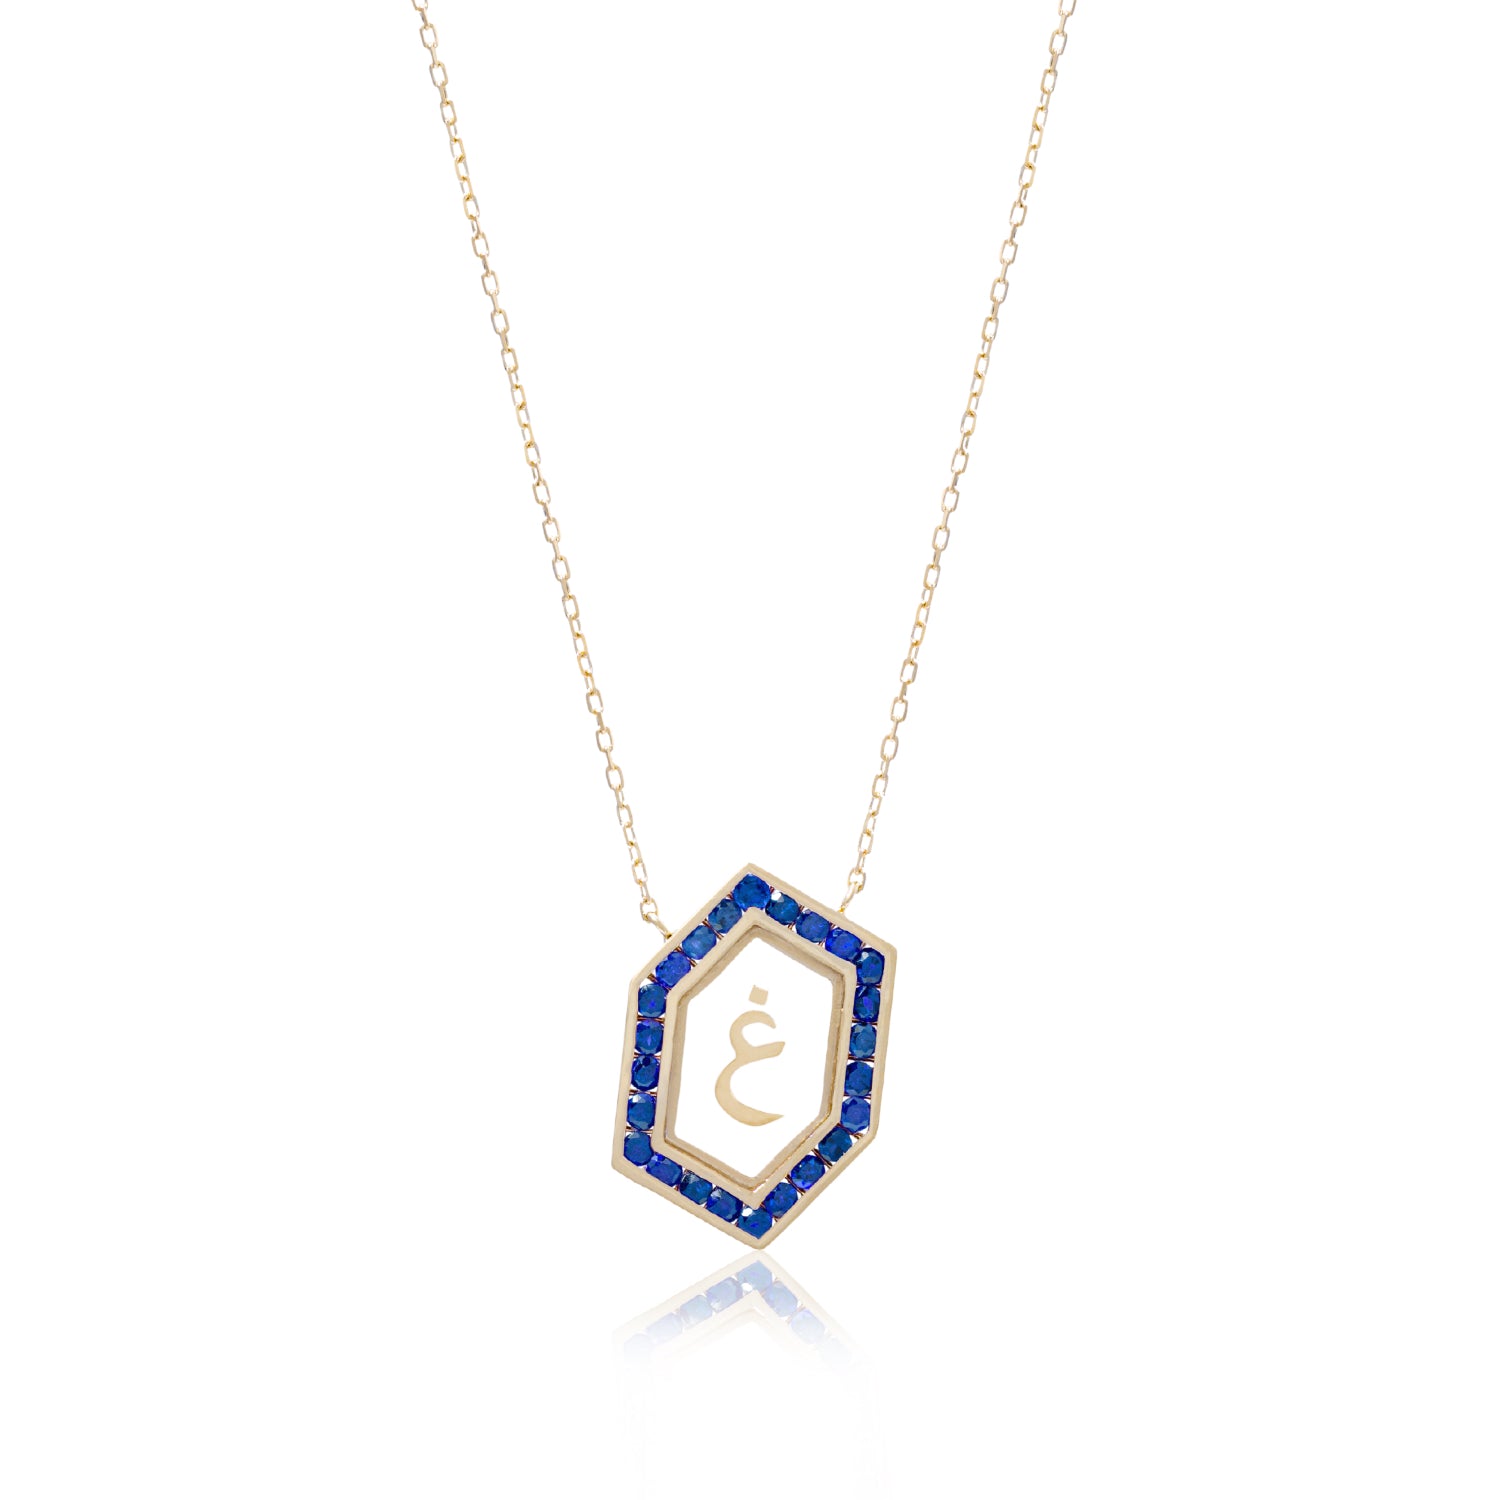 Qamoos 1.0 Letter غ Sapphire Necklace in Yellow Gold